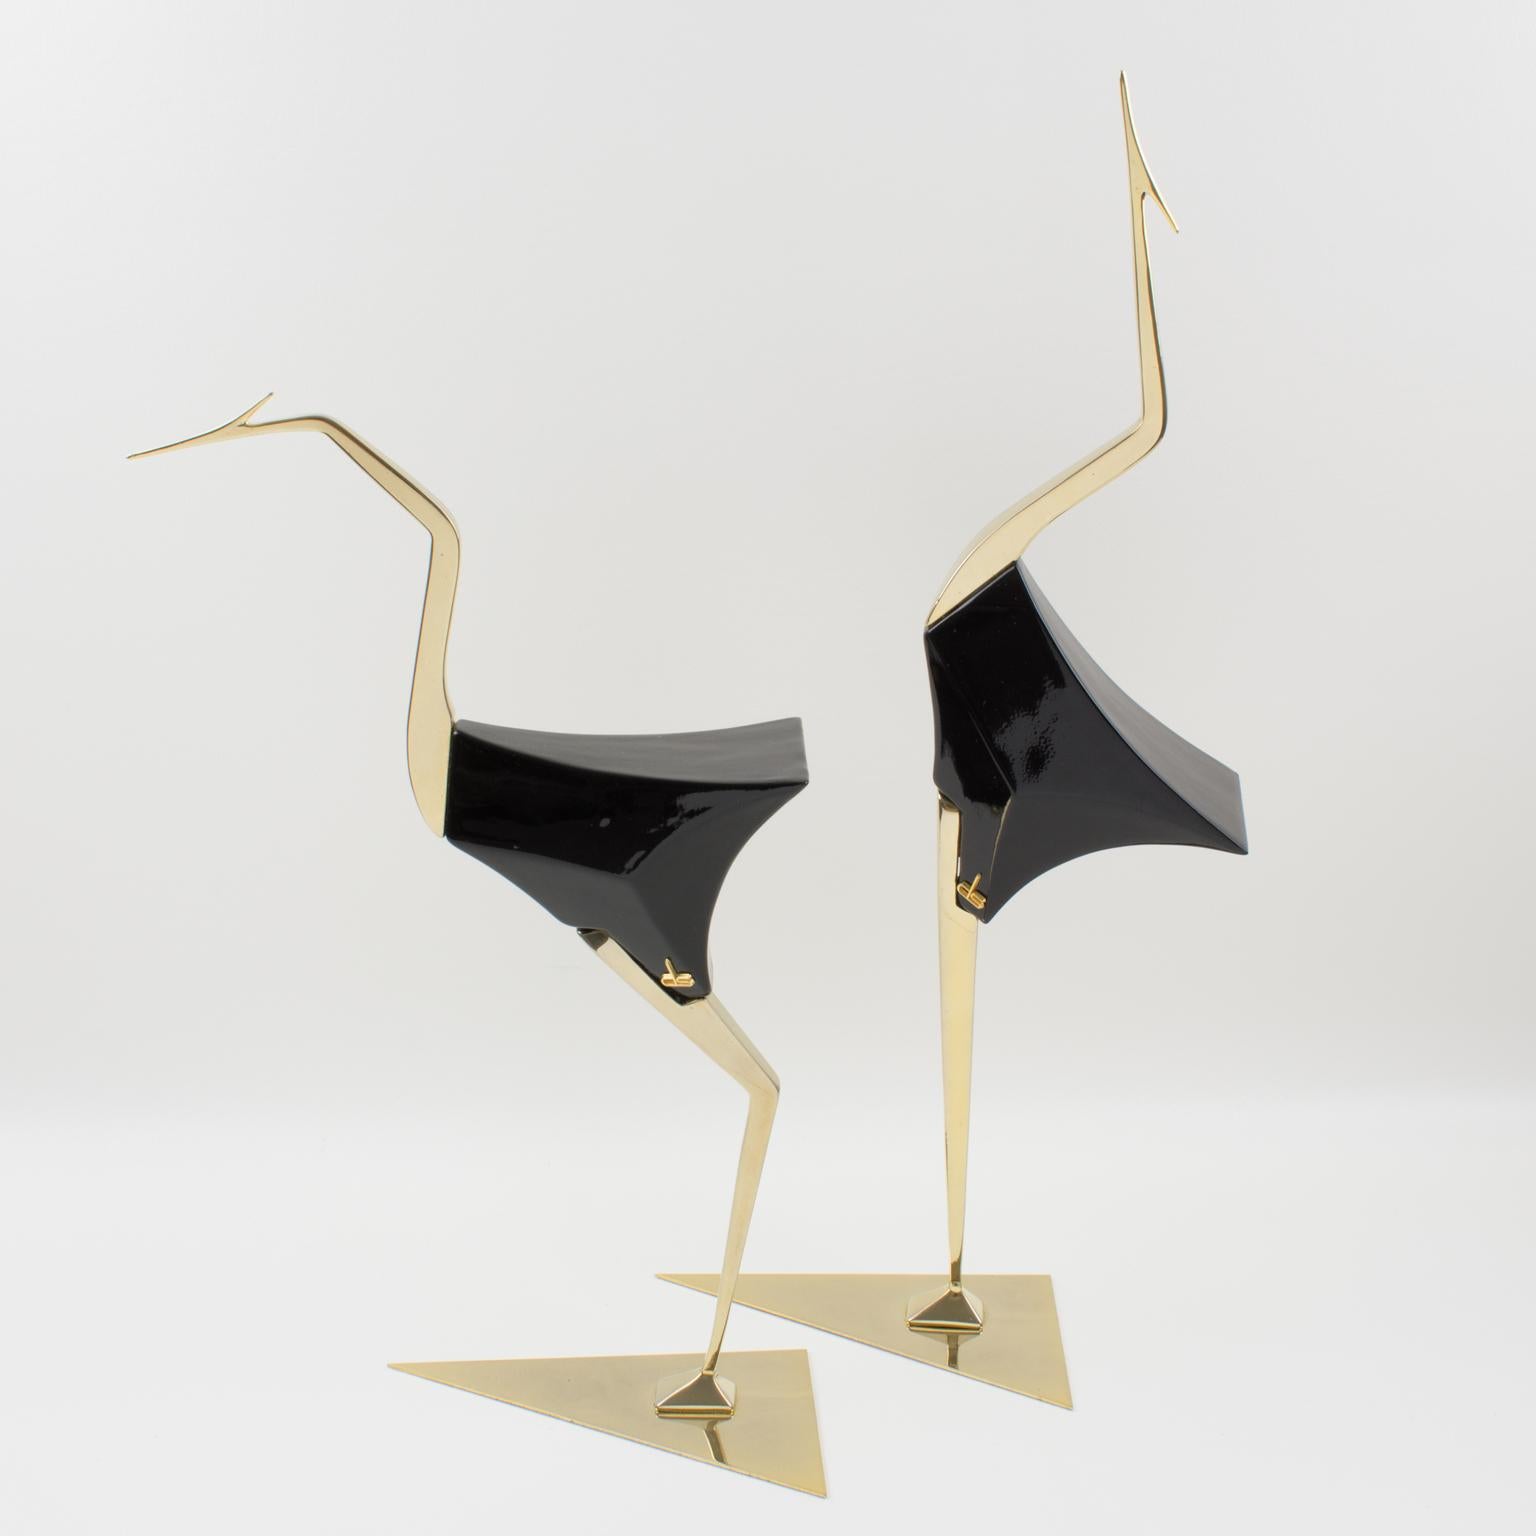 A stunning pair of large birds, egret or wader, designed by Italian company De Stijl in Firenze. Each bird is carefully hand-crafted with shiny gilded brass and glossy polished black lacquered carved wood. They have an unusual post-cubist design